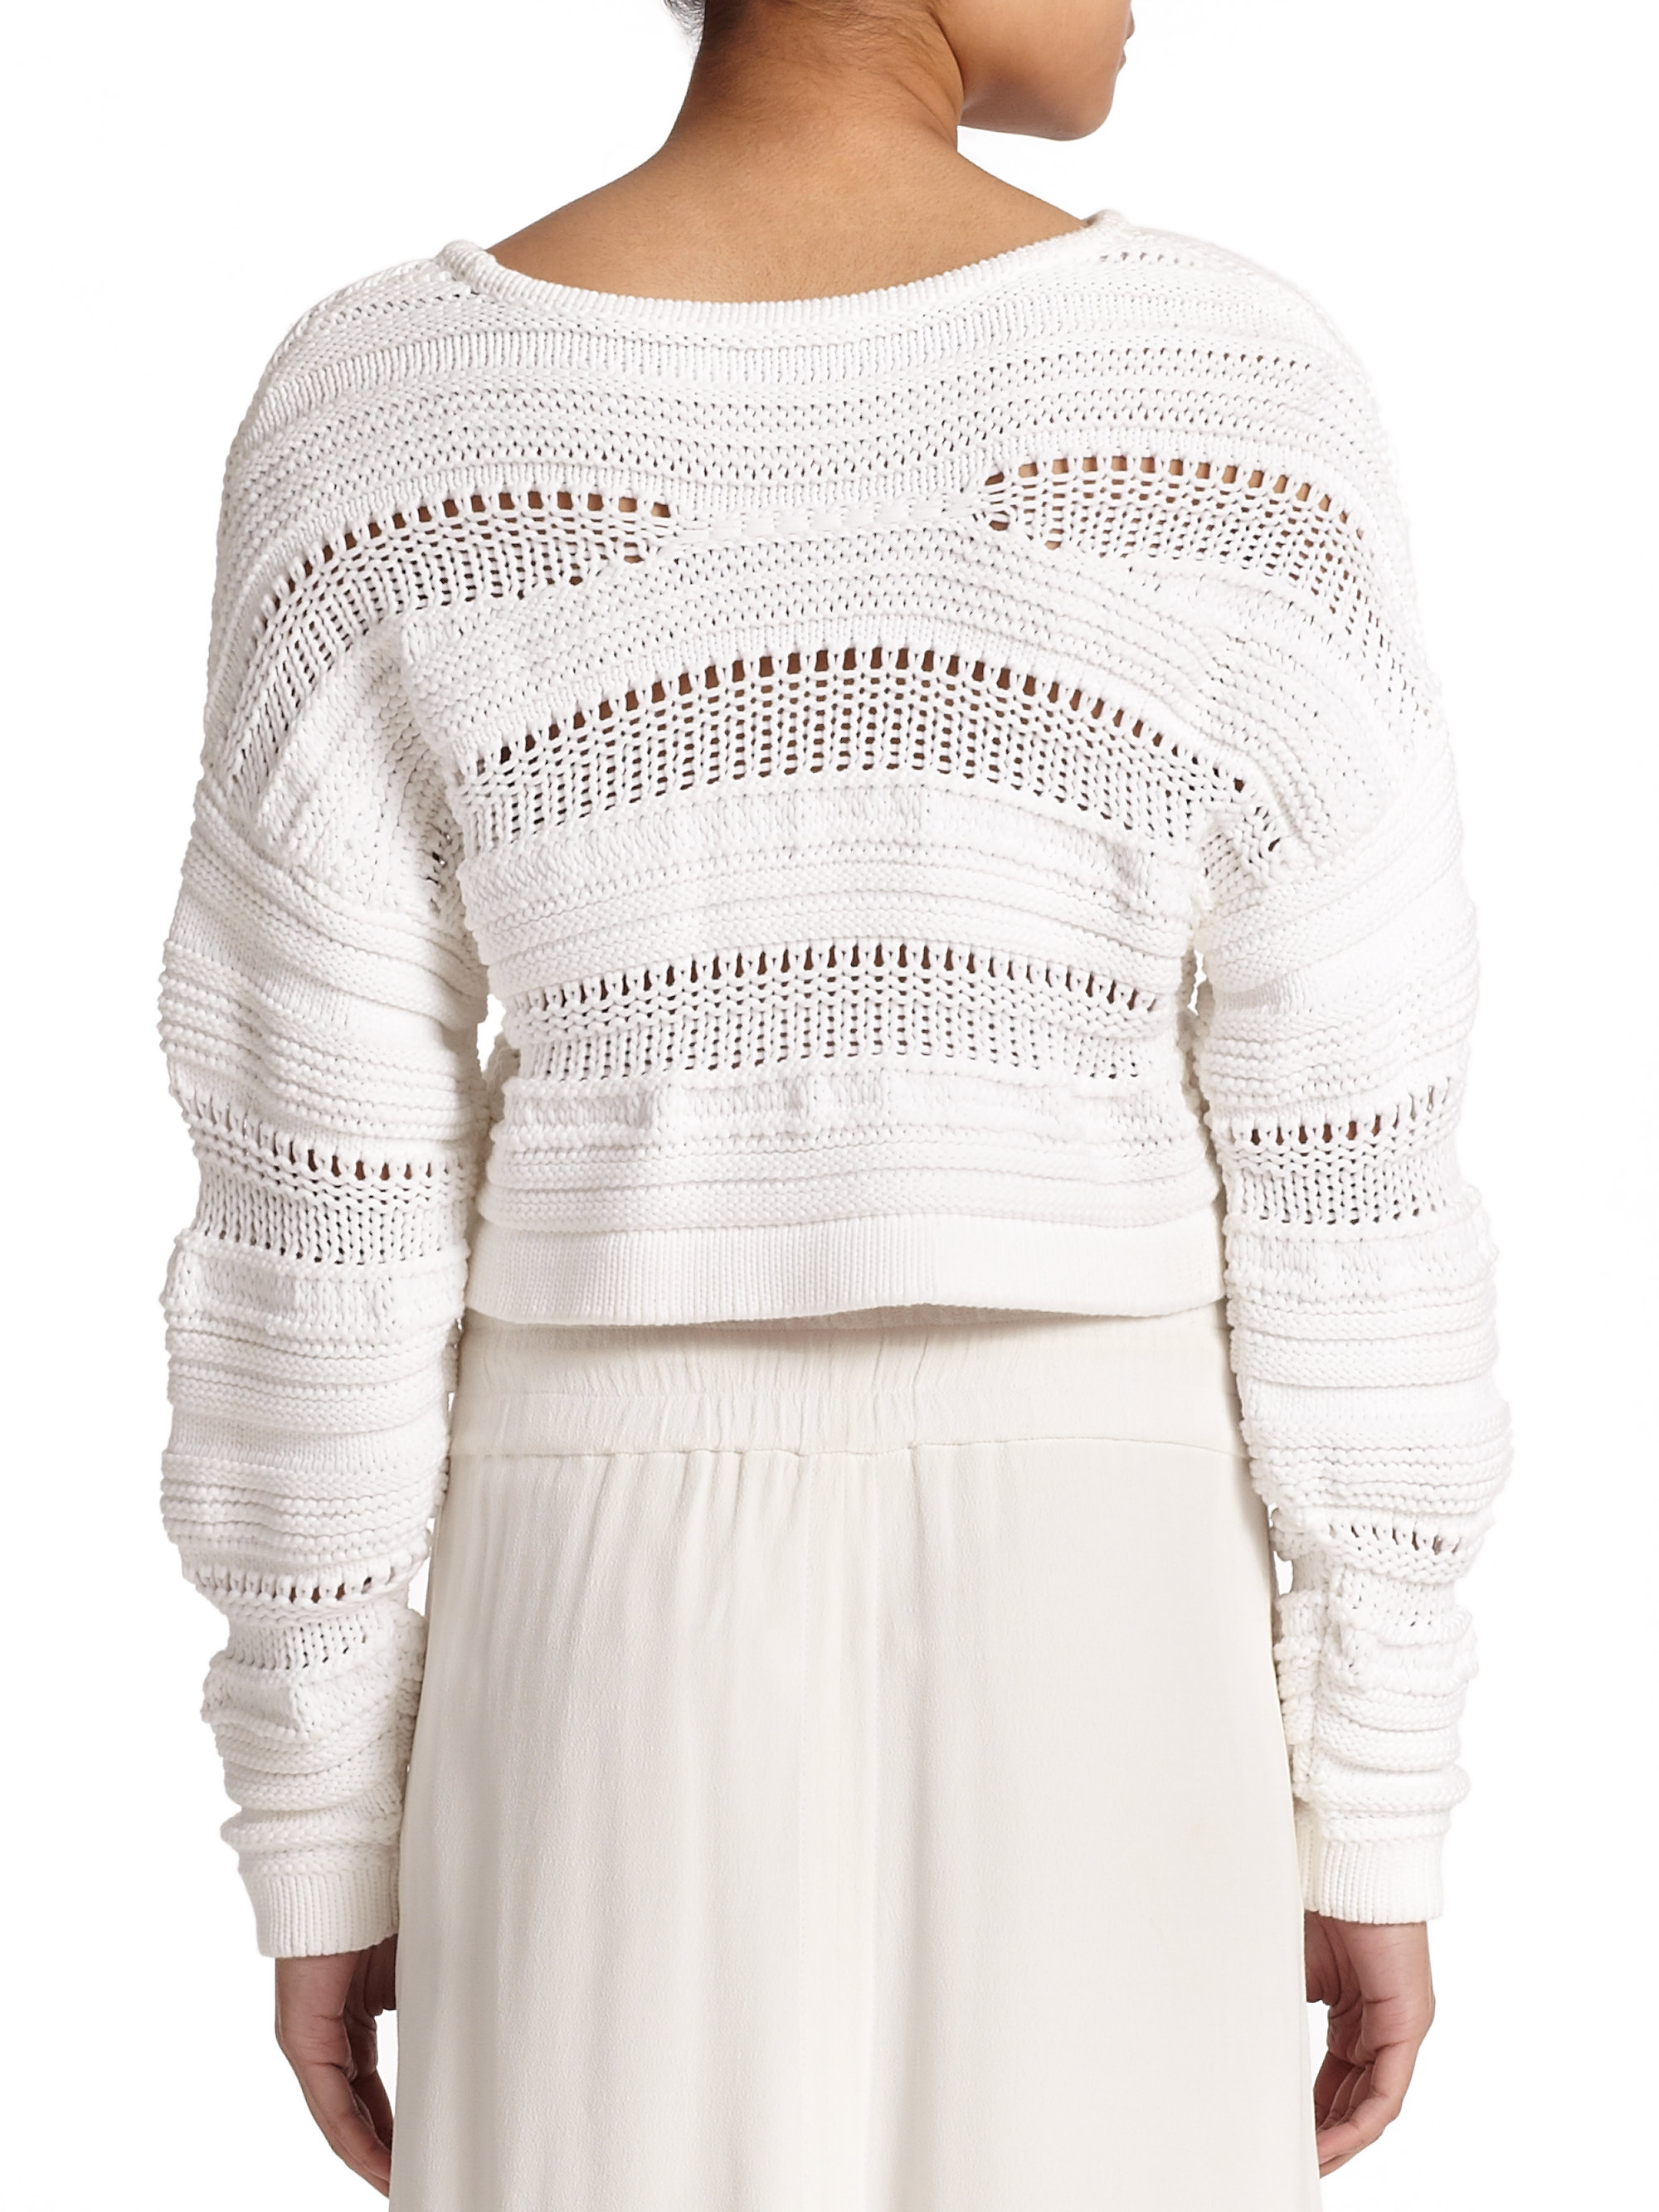 Helmut Lang Open-knit Cropped Sweater in White - Lyst